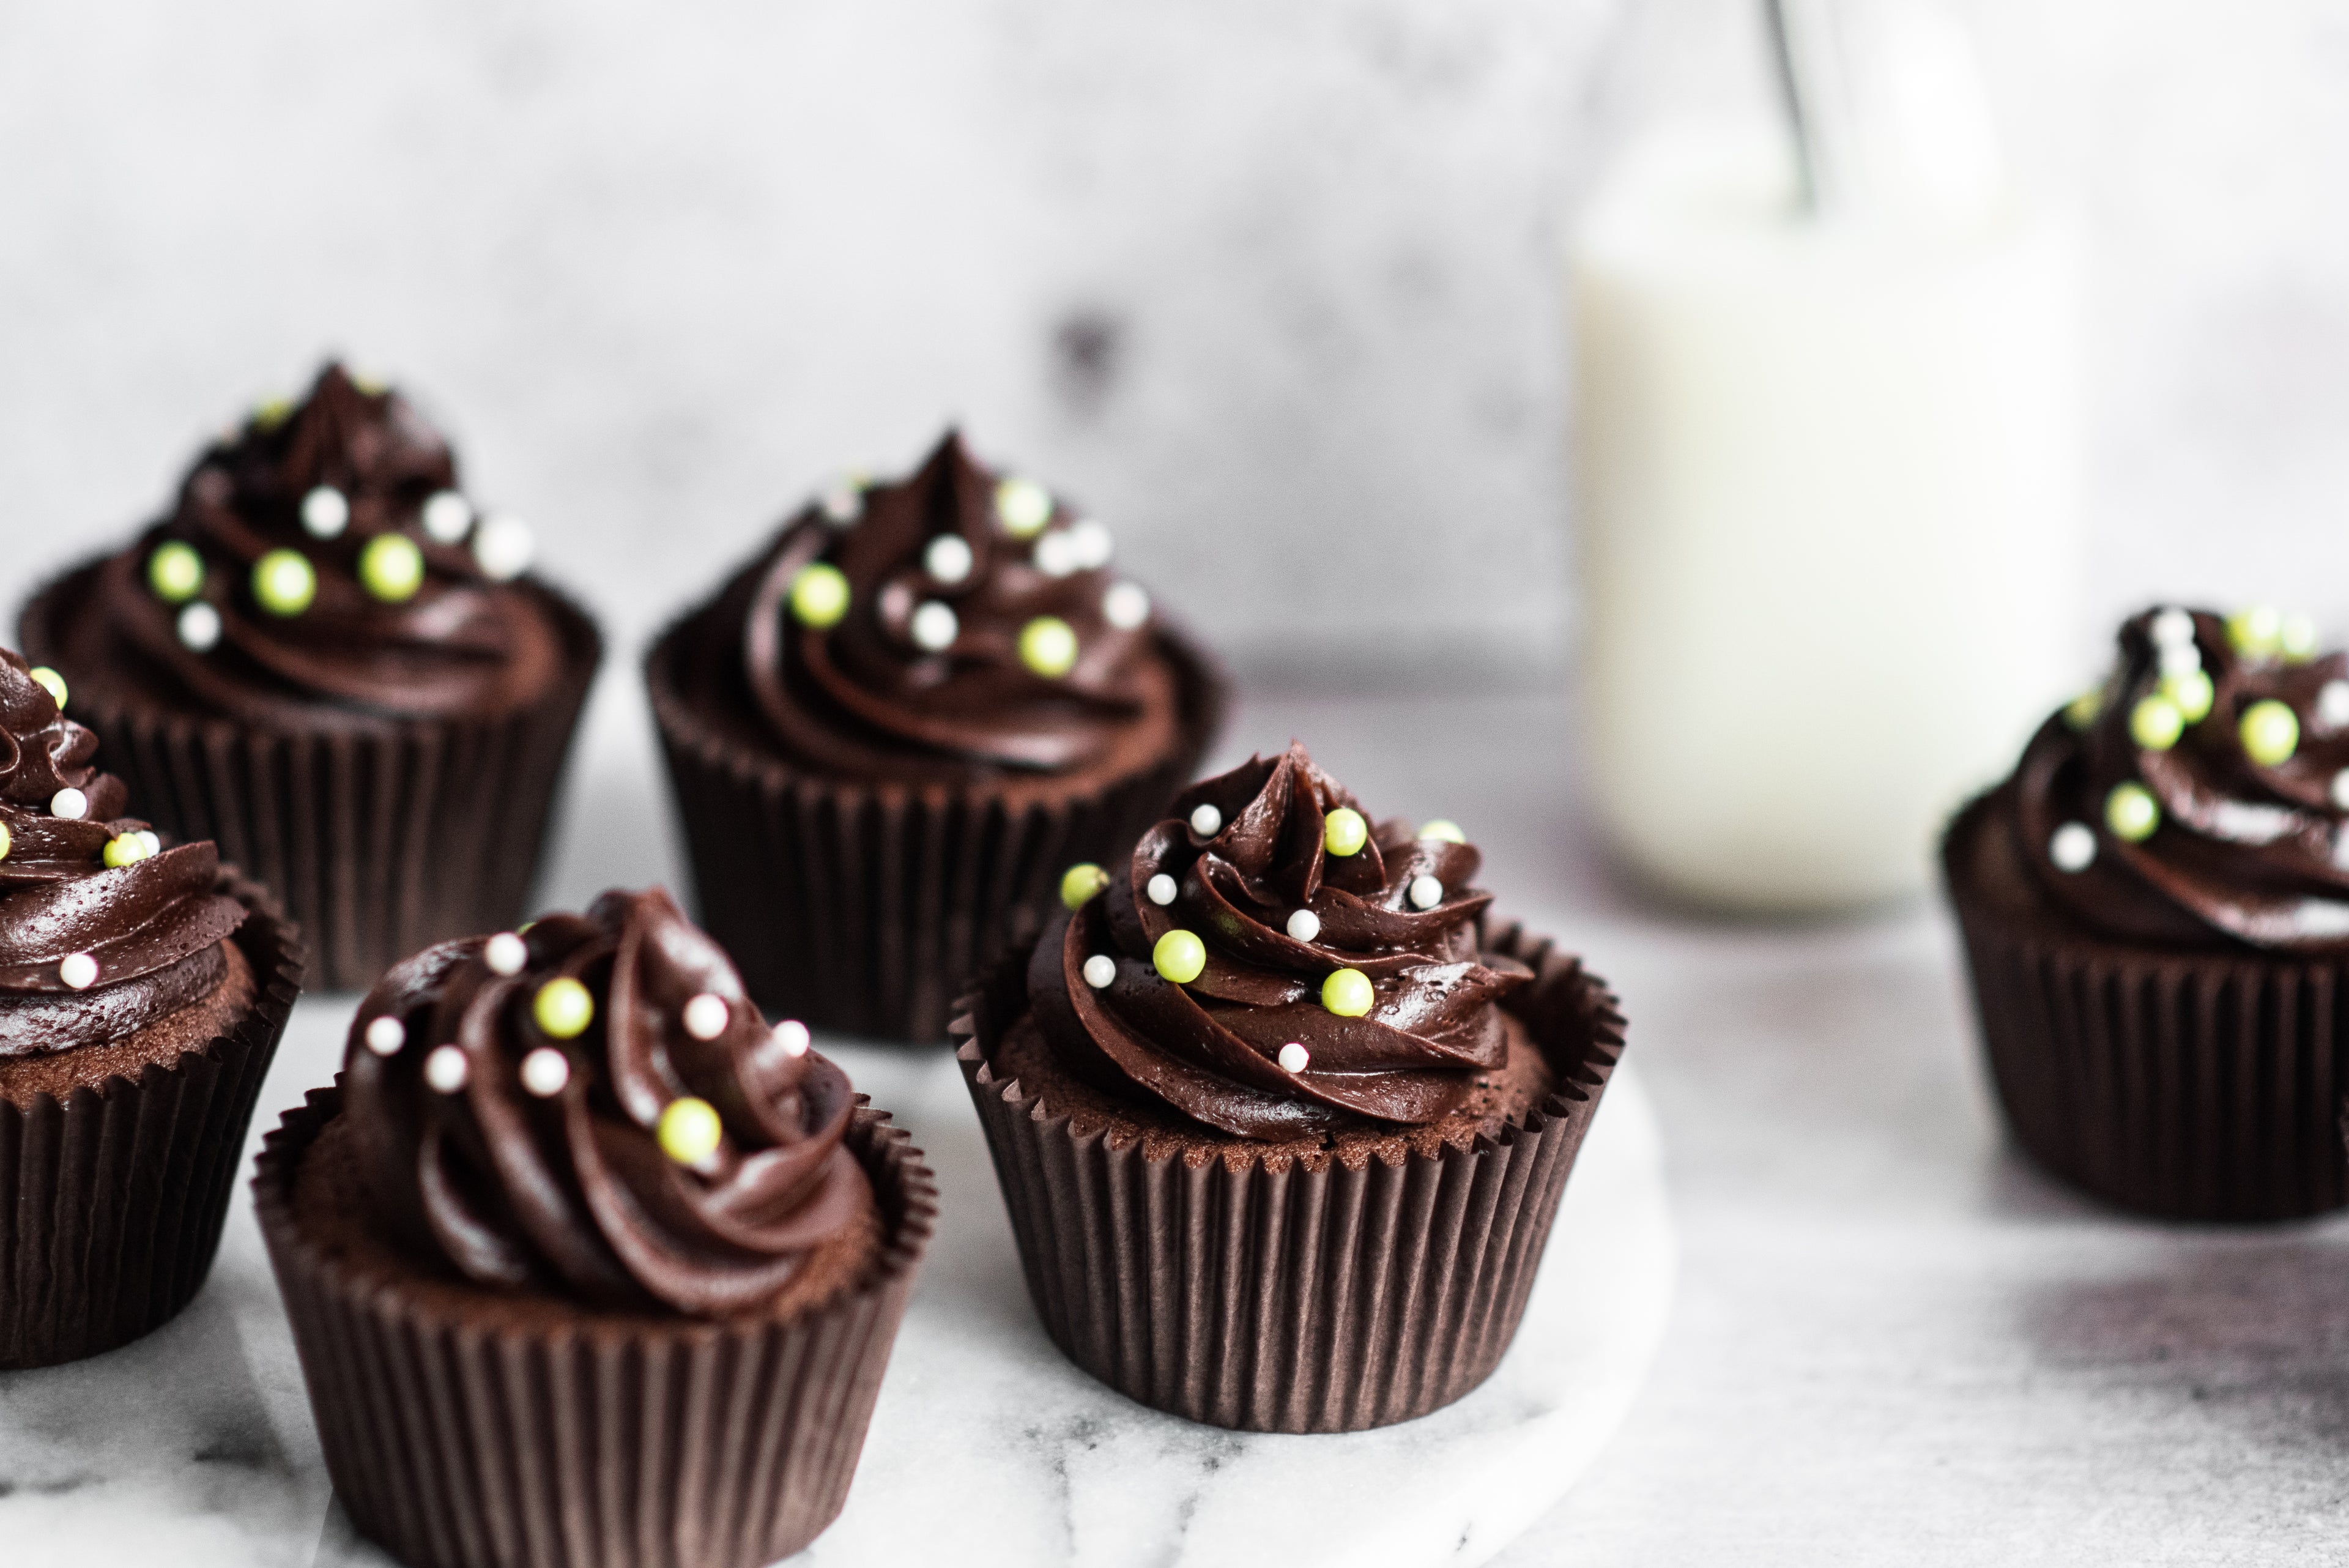 Chocolate cupcakes with chocolate buttercream